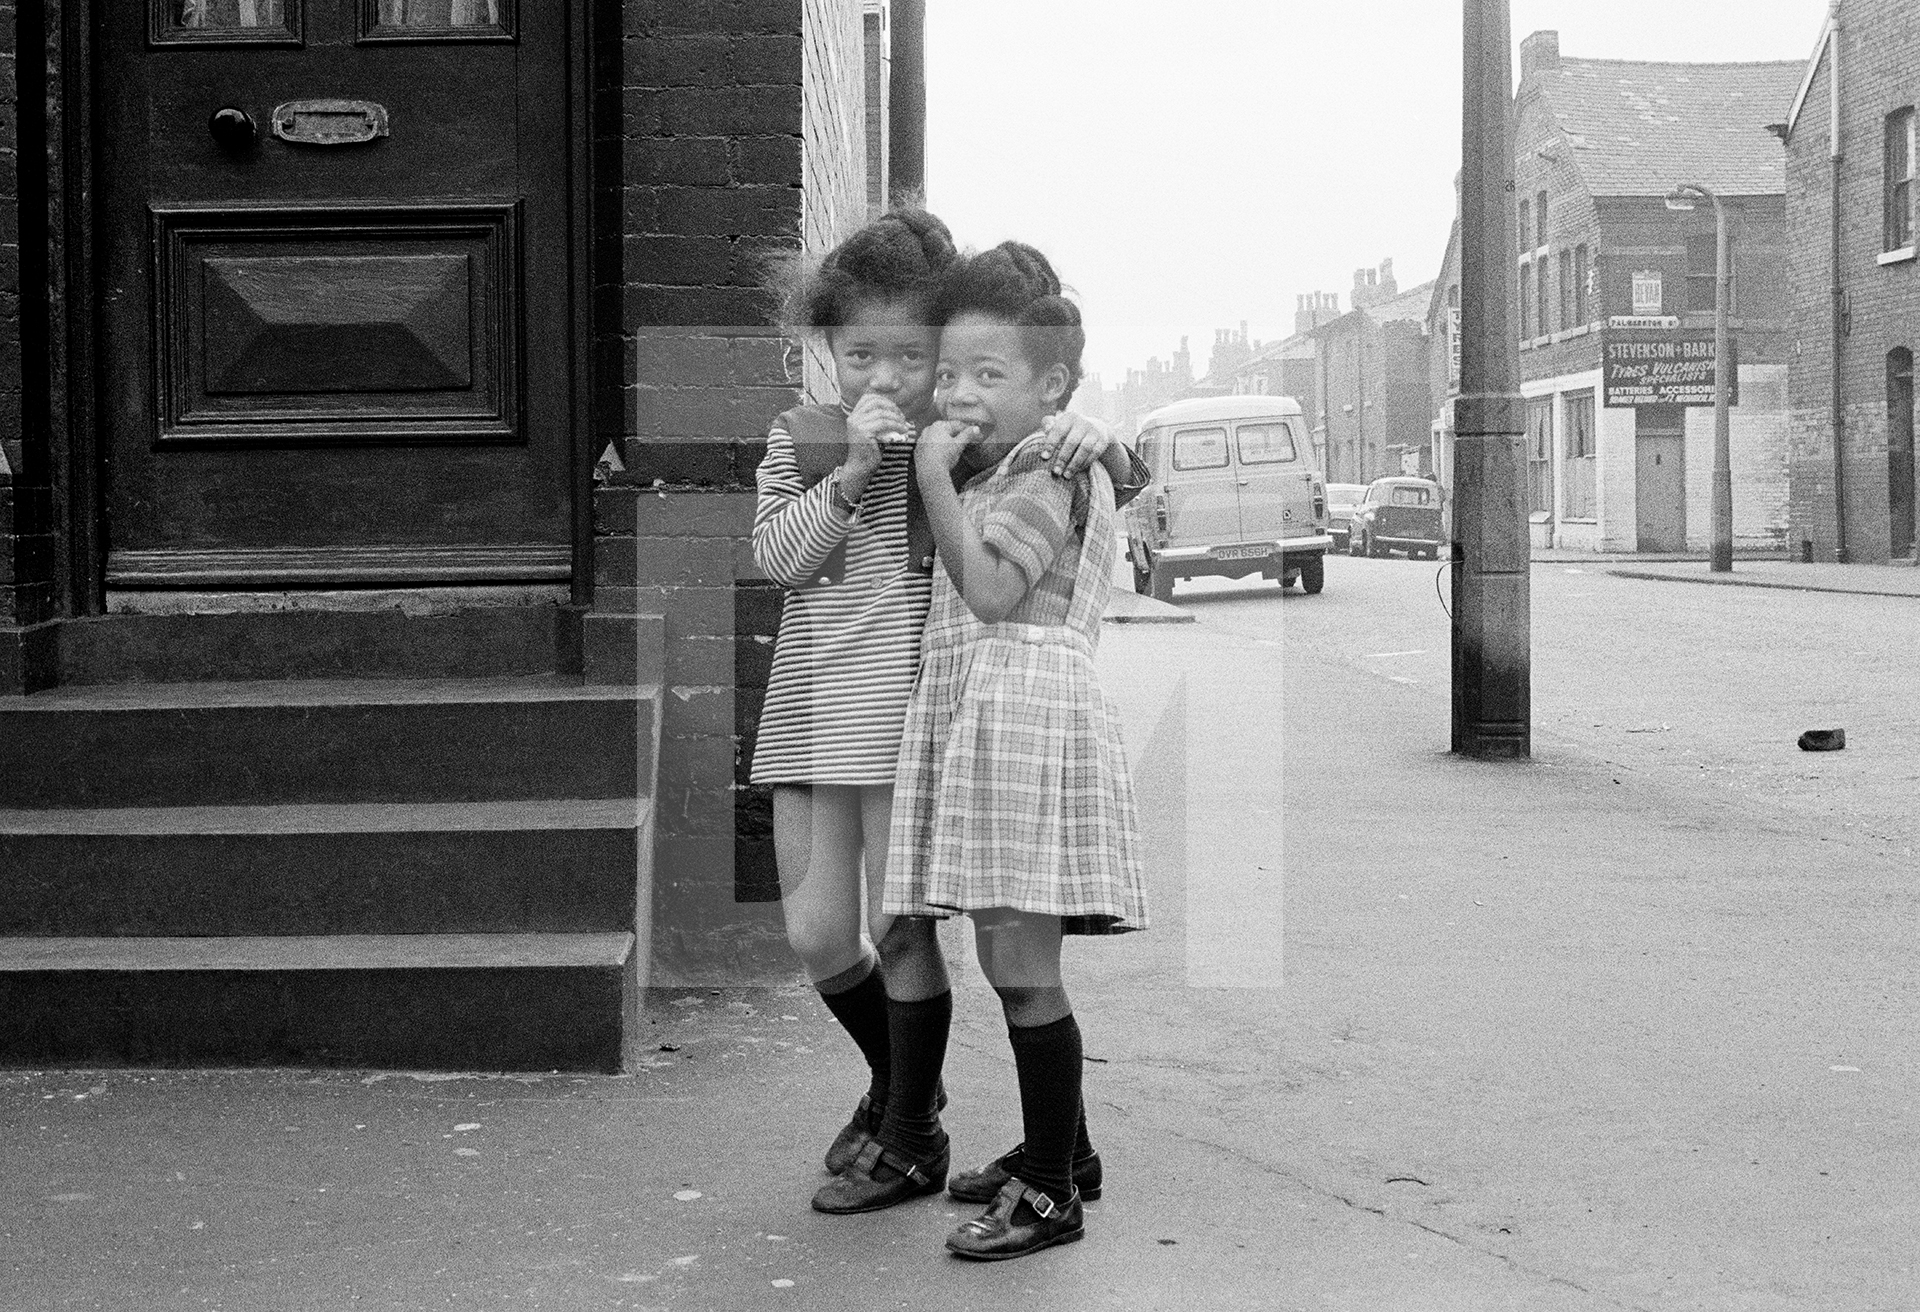 Left-to-right: Veronica Thompson, Sharon Richards, Moss Side, Manchester. 1972 by Daniel Meadows